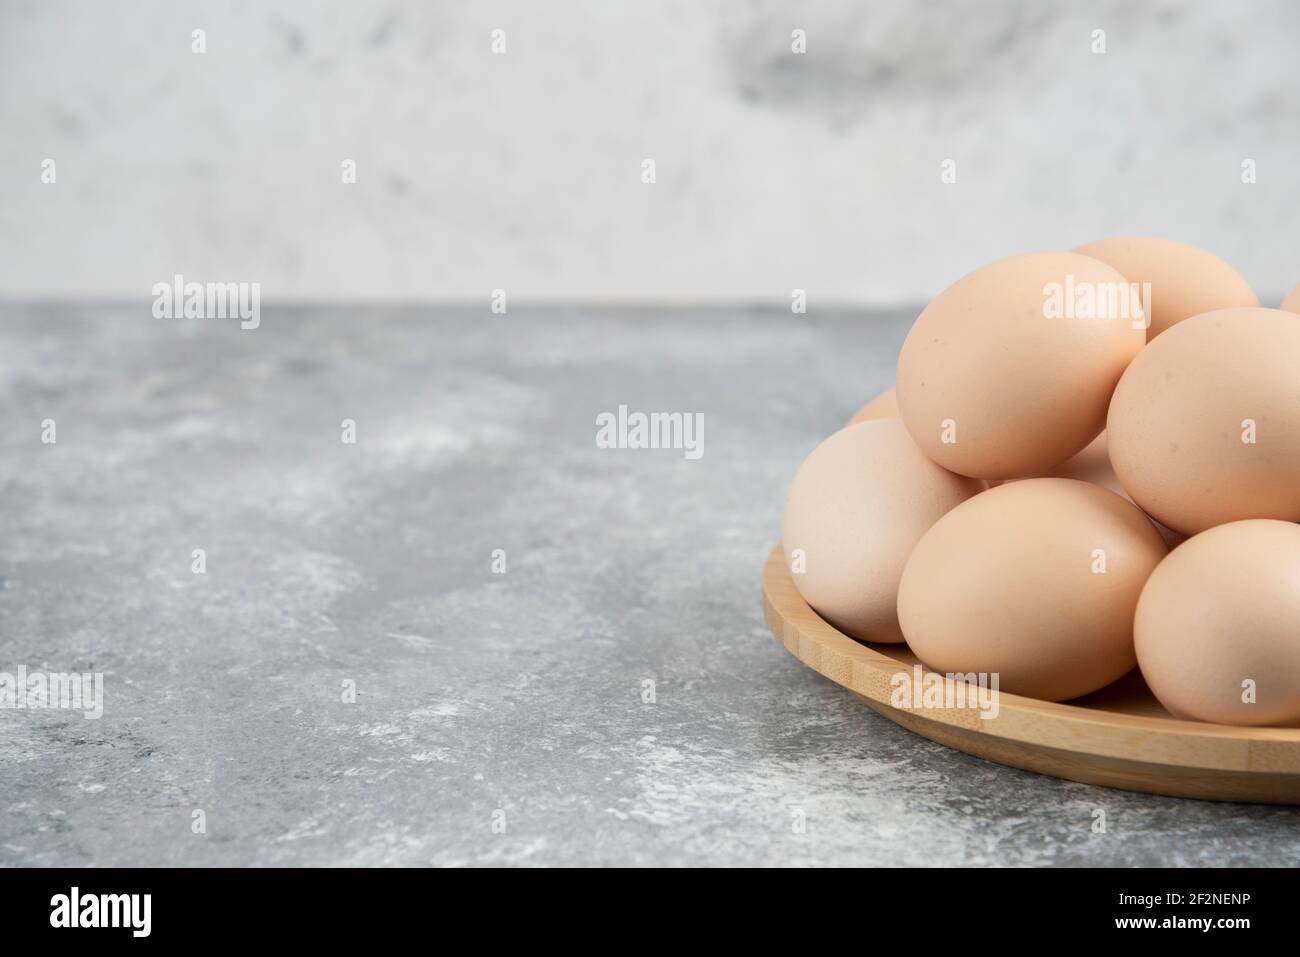 Wooden plate of fresh organic raw eggs on marble surface Stock Photo